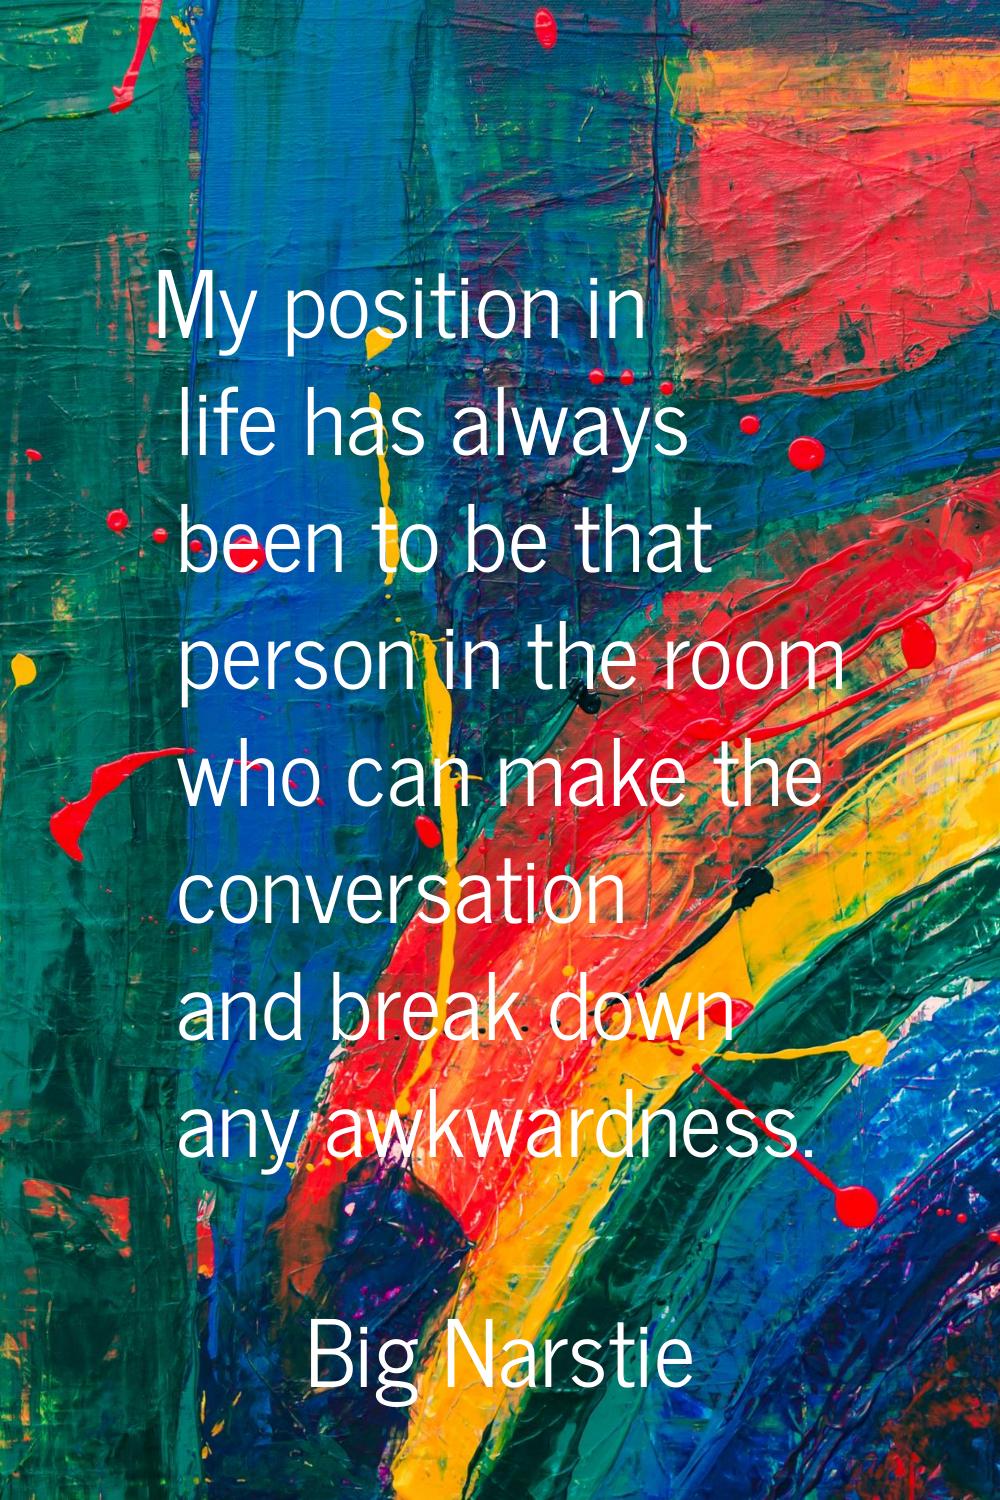 My position in life has always been to be that person in the room who can make the conversation and